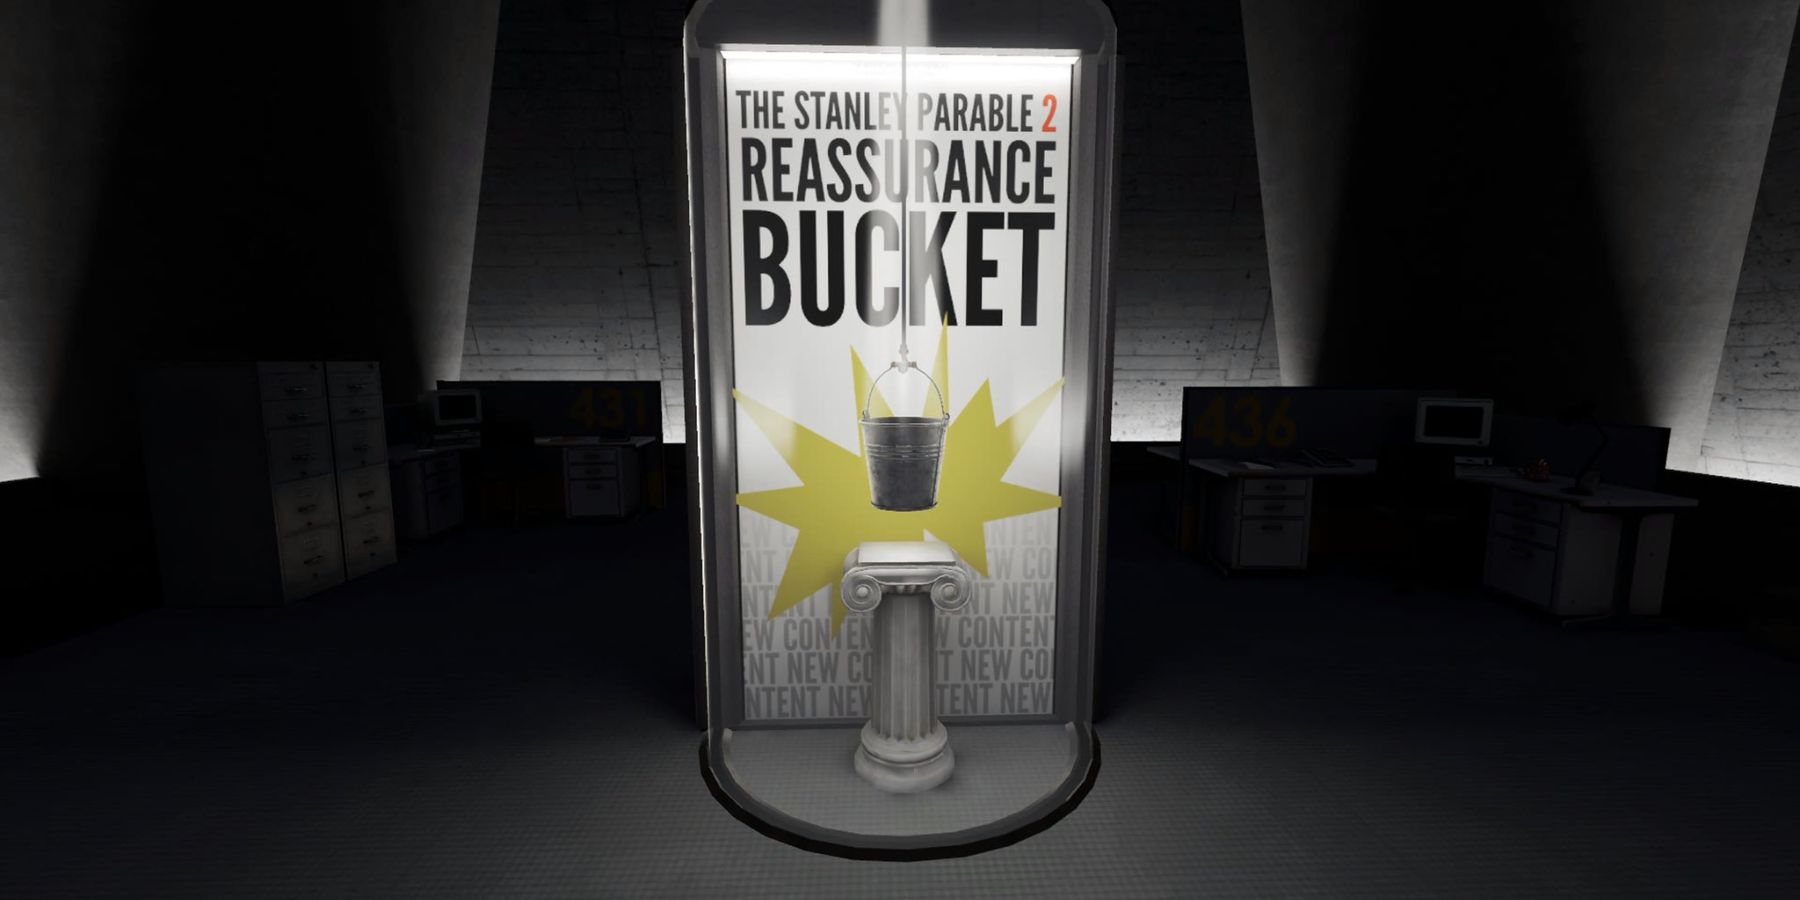 a glass case in the middle of a shadowy room. inside the glass case is a metal bucket being lowered from above by a rope. Behind the bucket, the case says "The Stanley Parable 2 Reassurance Bucket" followed by an exciting yellow graphic 